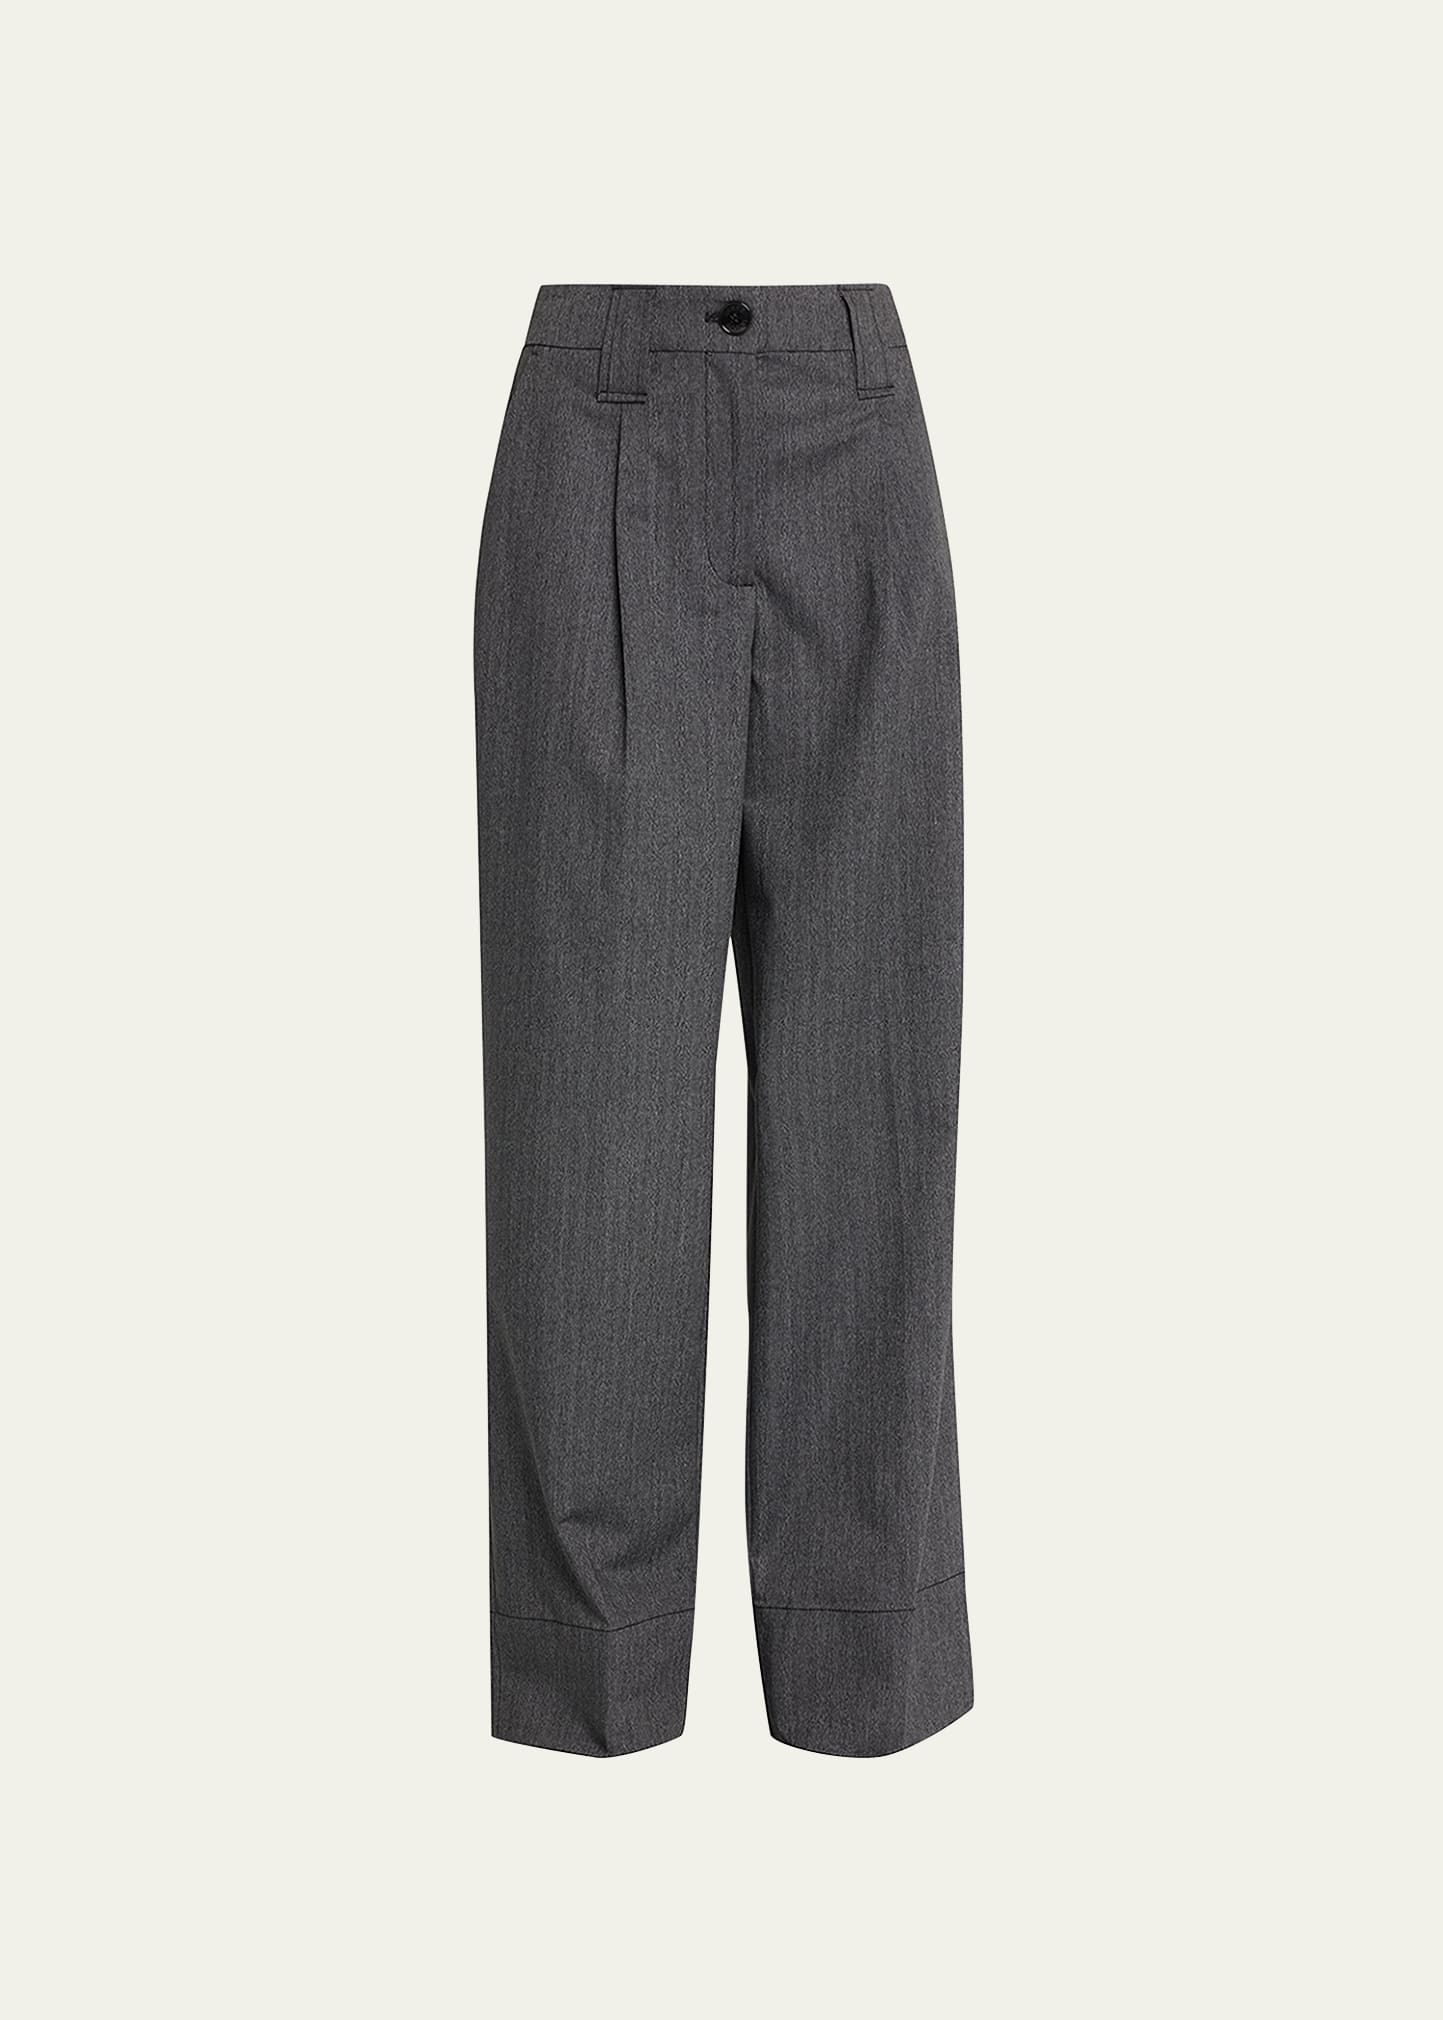 Ganni Pleated Draped Suiting Pants